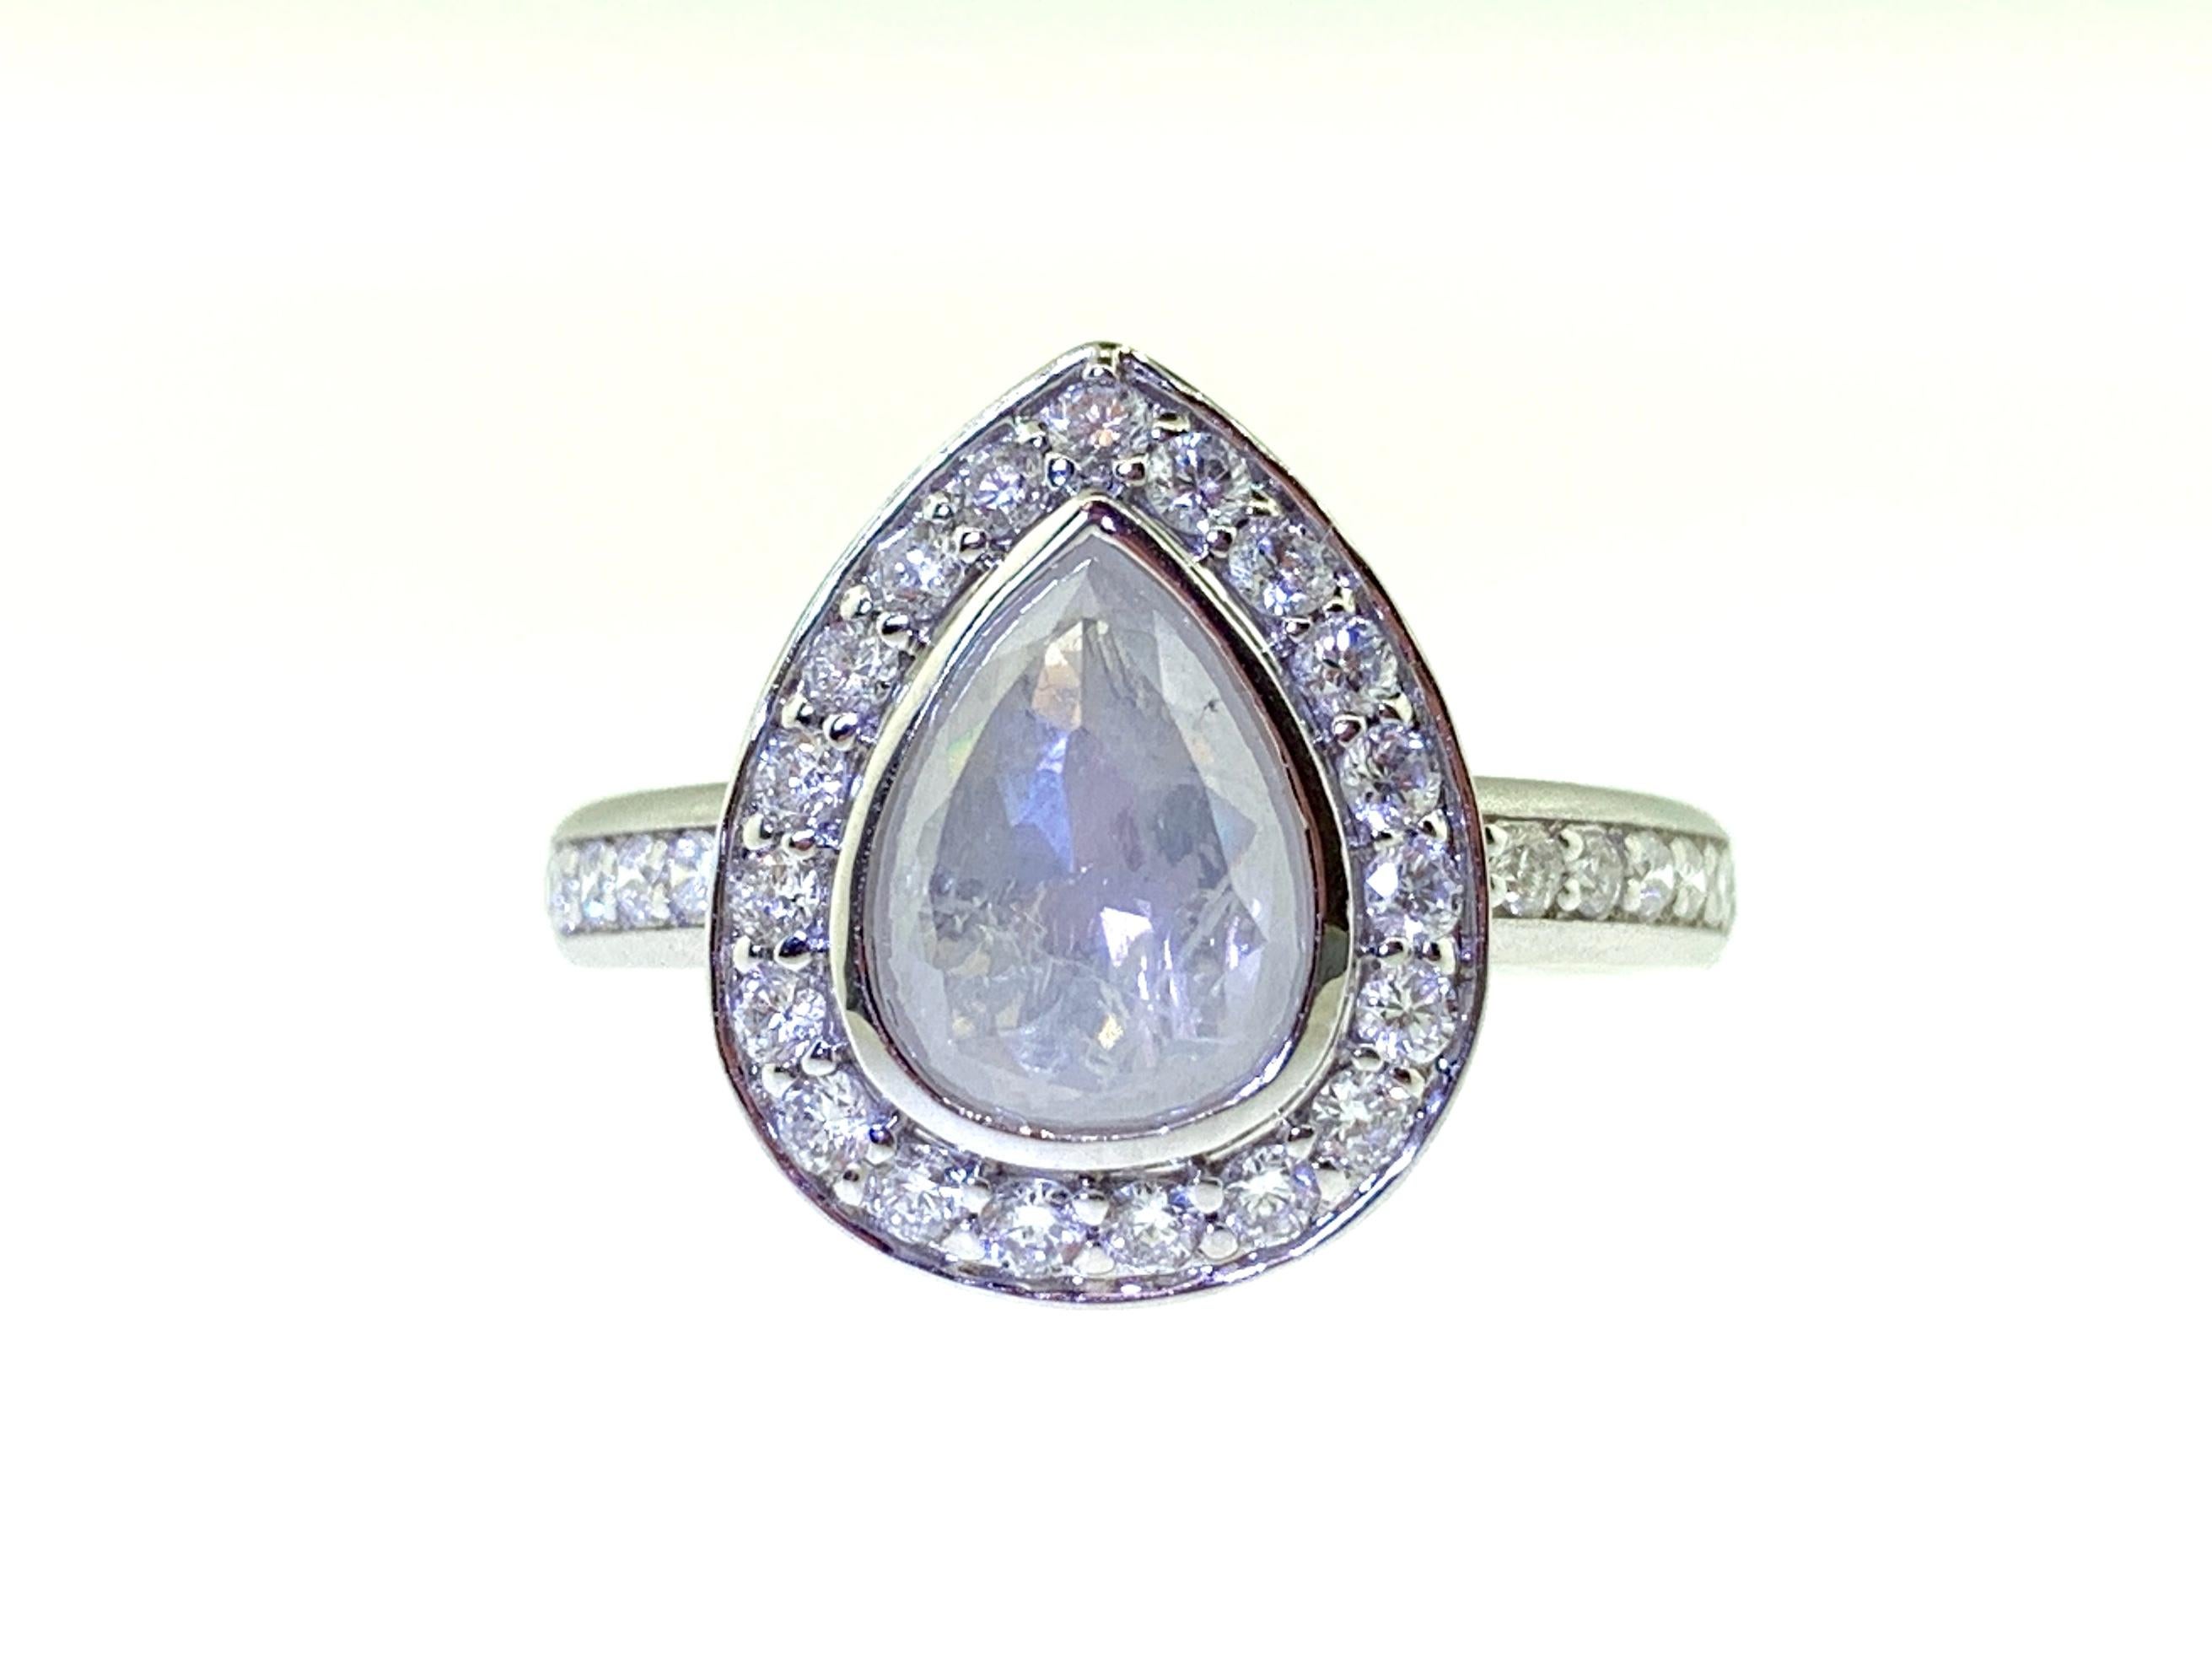 This stunning ring features a 1.25 Carat Rose Cut Pear Shape White Diamond with a Diamond Halo. This ring is set in 18k White Gold on a Diamond Shank. Total Diamond Weight (not including center stone) = 0.50 Carats. Ring Size = 6 1/2.